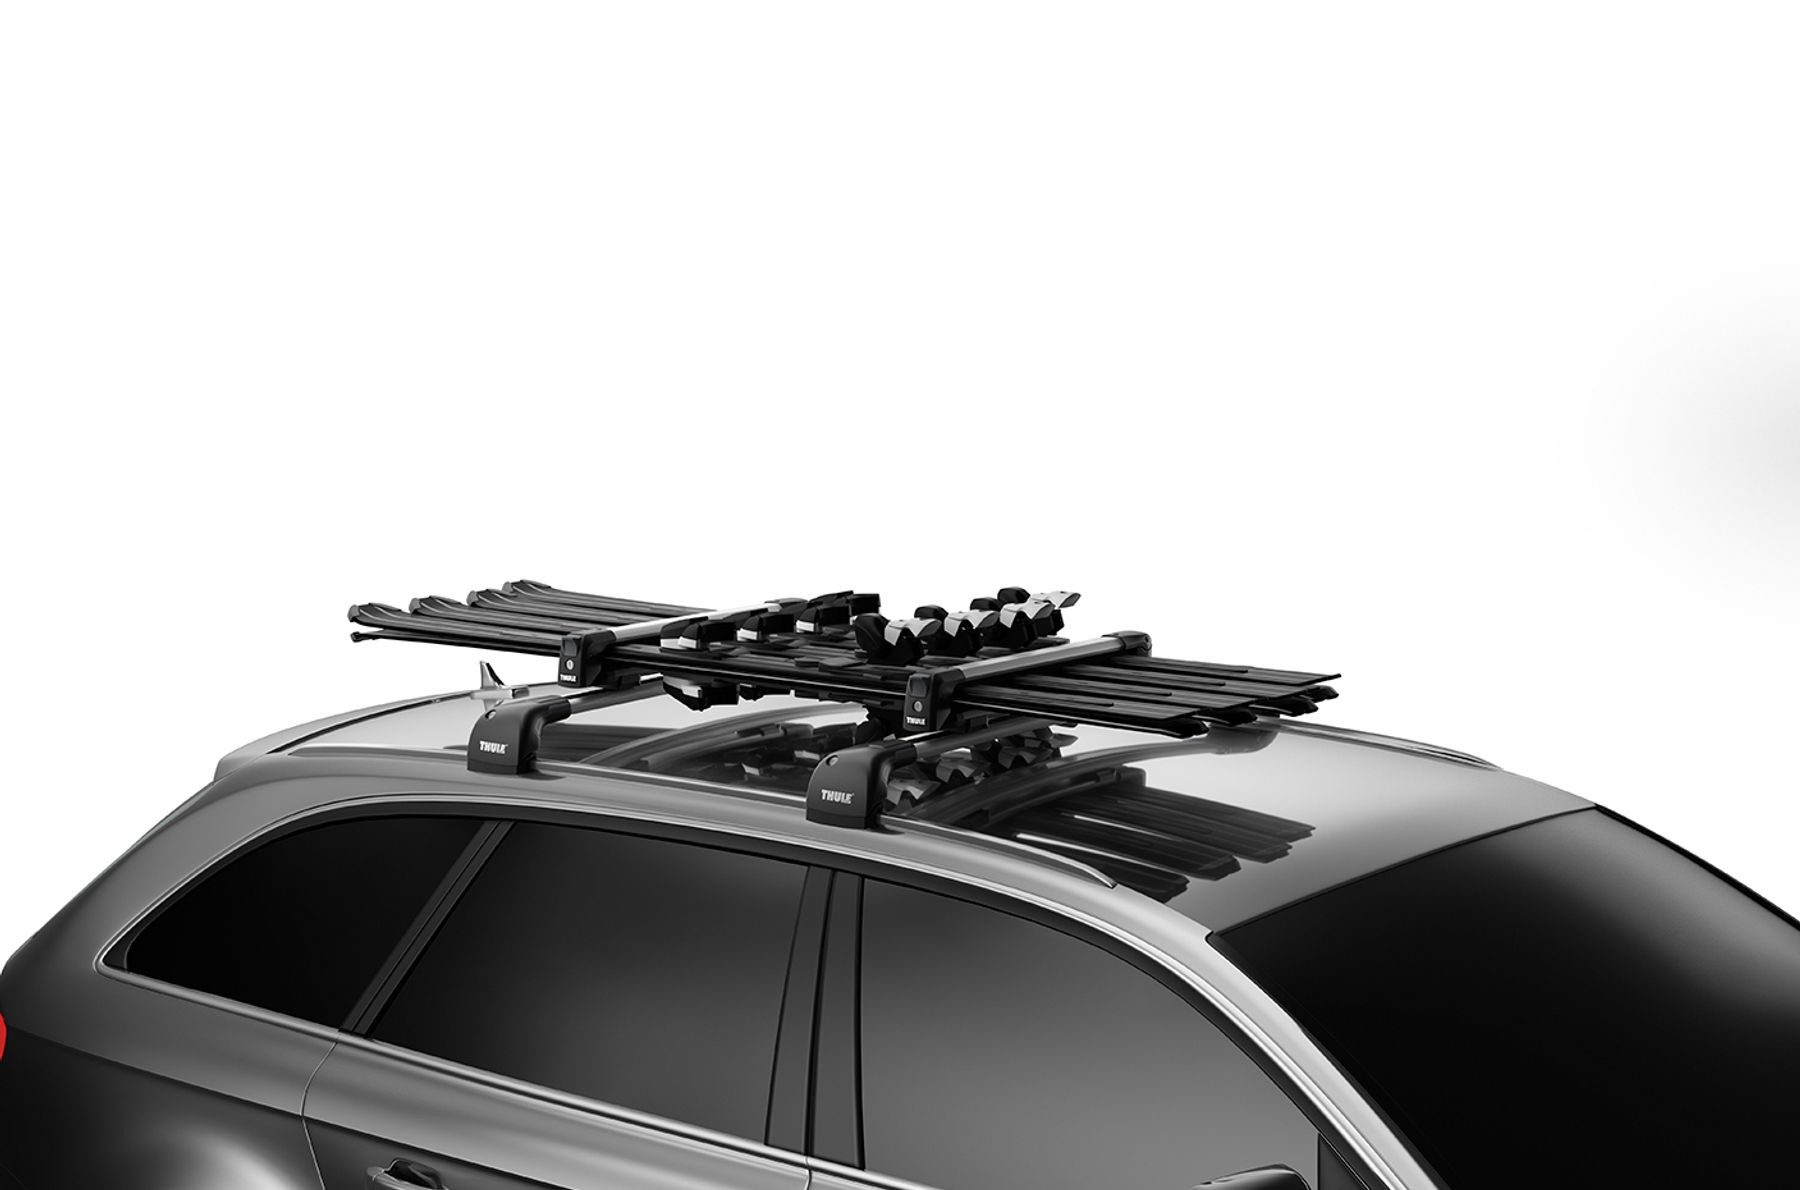 Snowpack Ski Carrier Roof Bar Accessory Thule T Track Adapter 889-6 